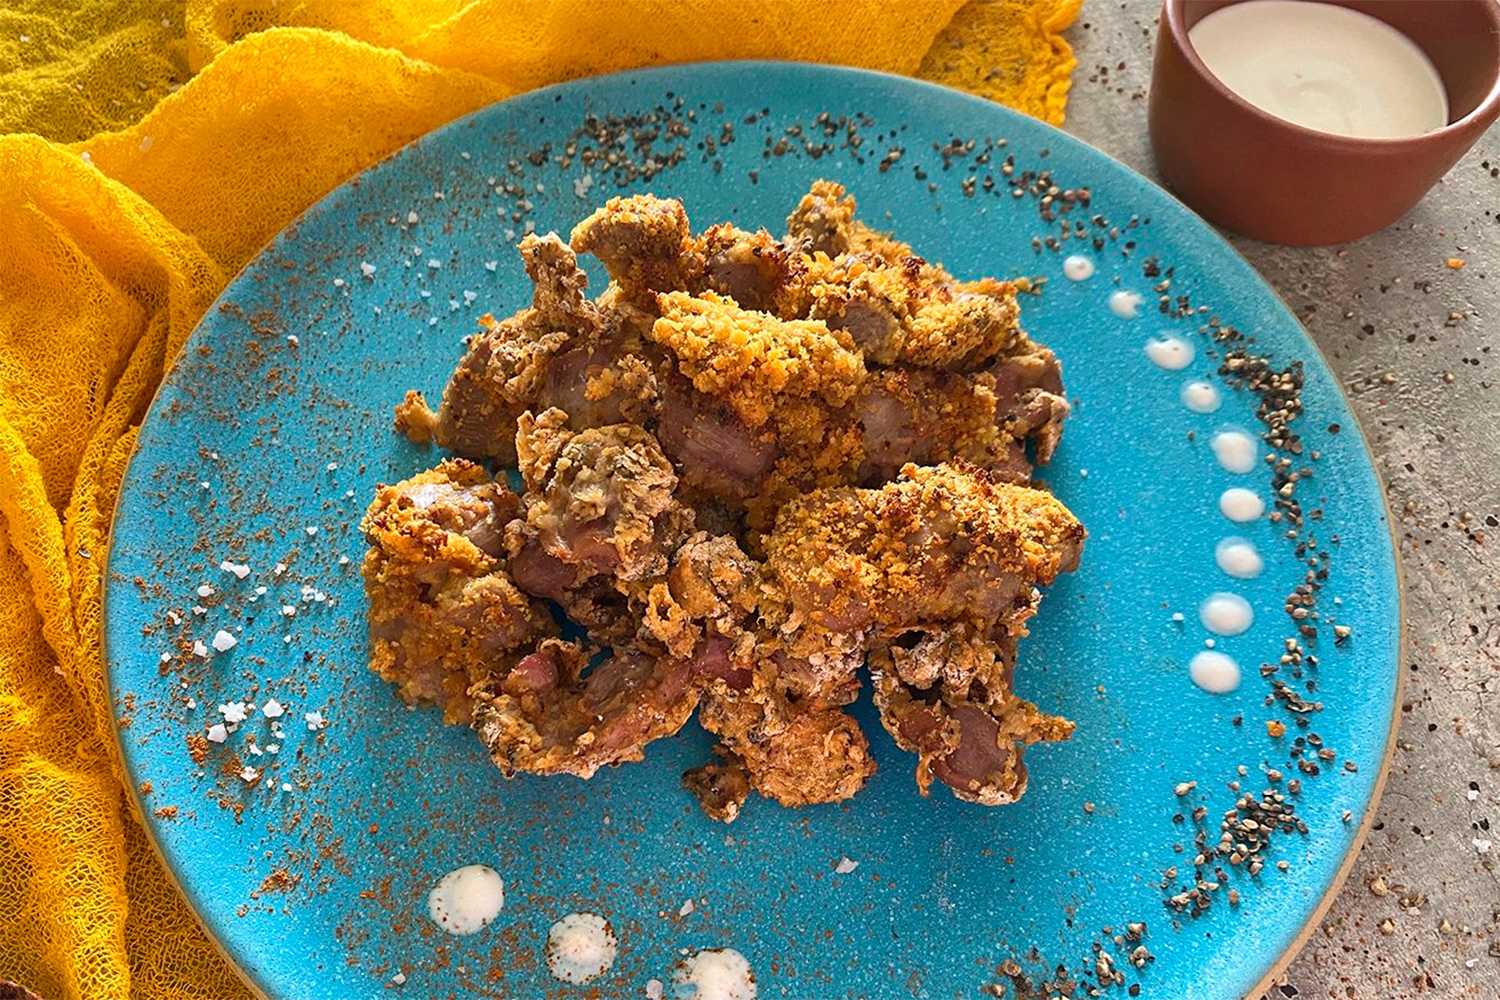 Cooked chicken gizzards coated with bread crumbs on a blue plate with ground pepper